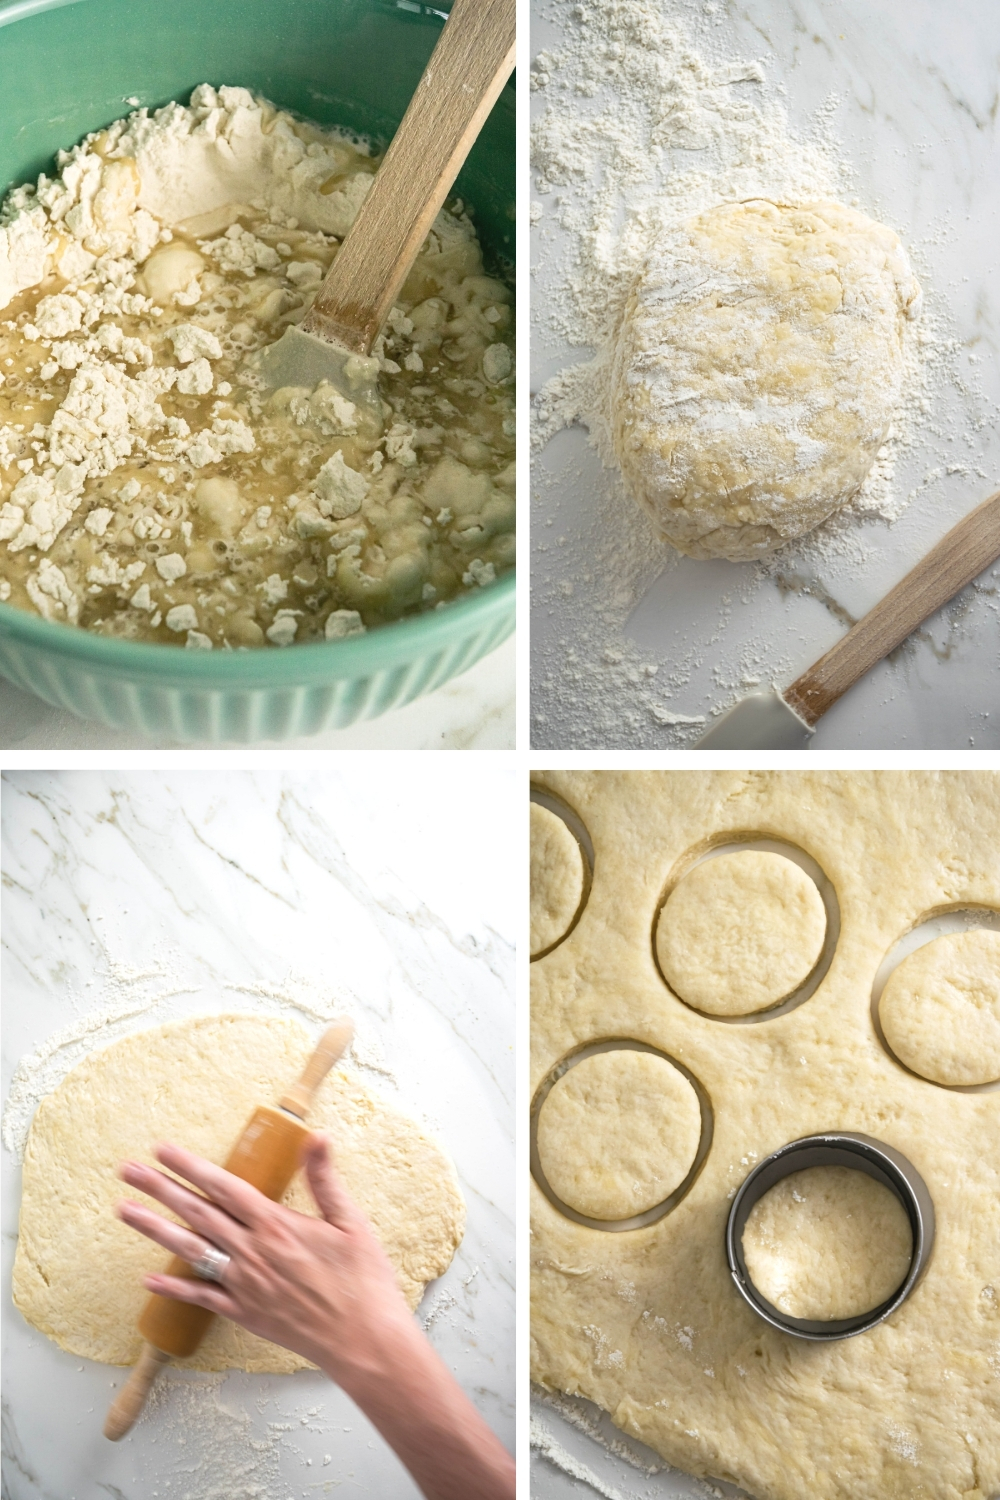 A four way split picture showing the process of how to make biscuits.